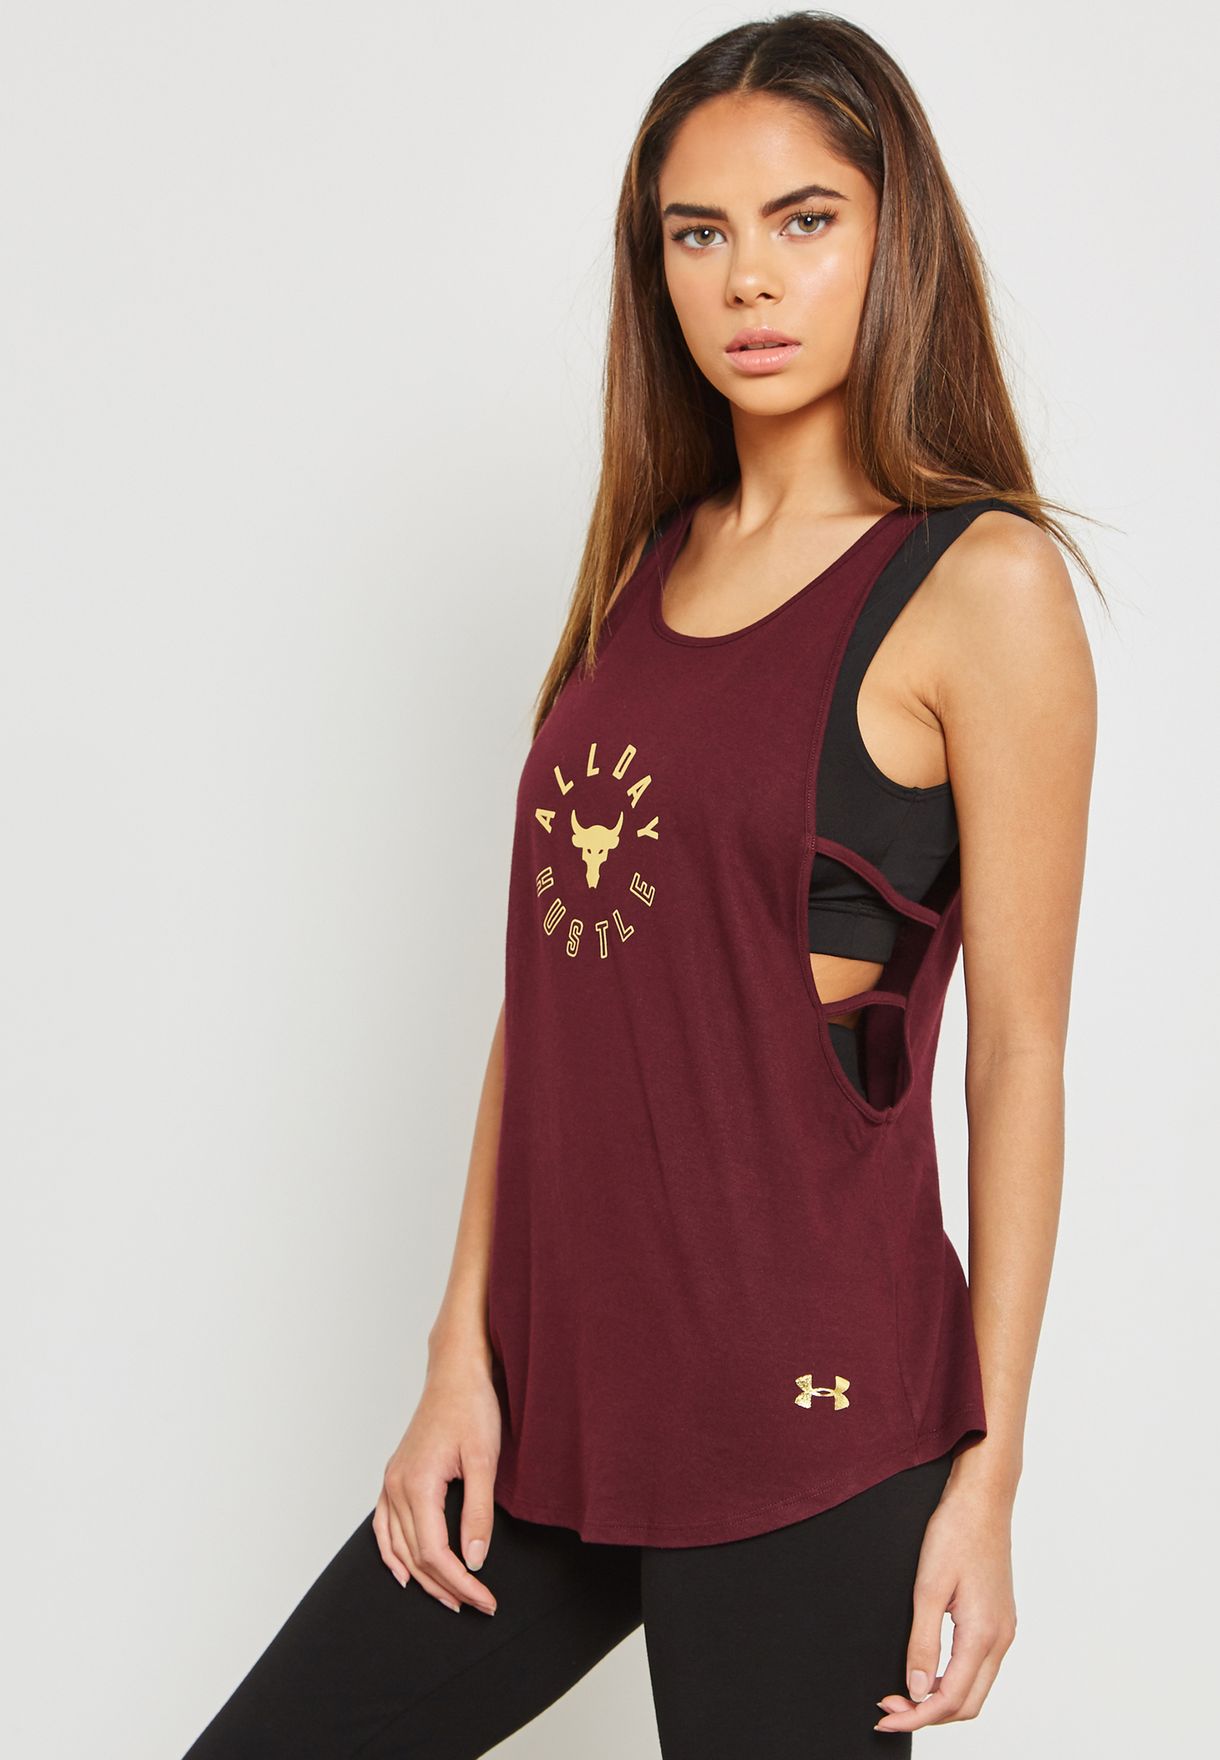 Buy Under Armour burgundy The Rock All 